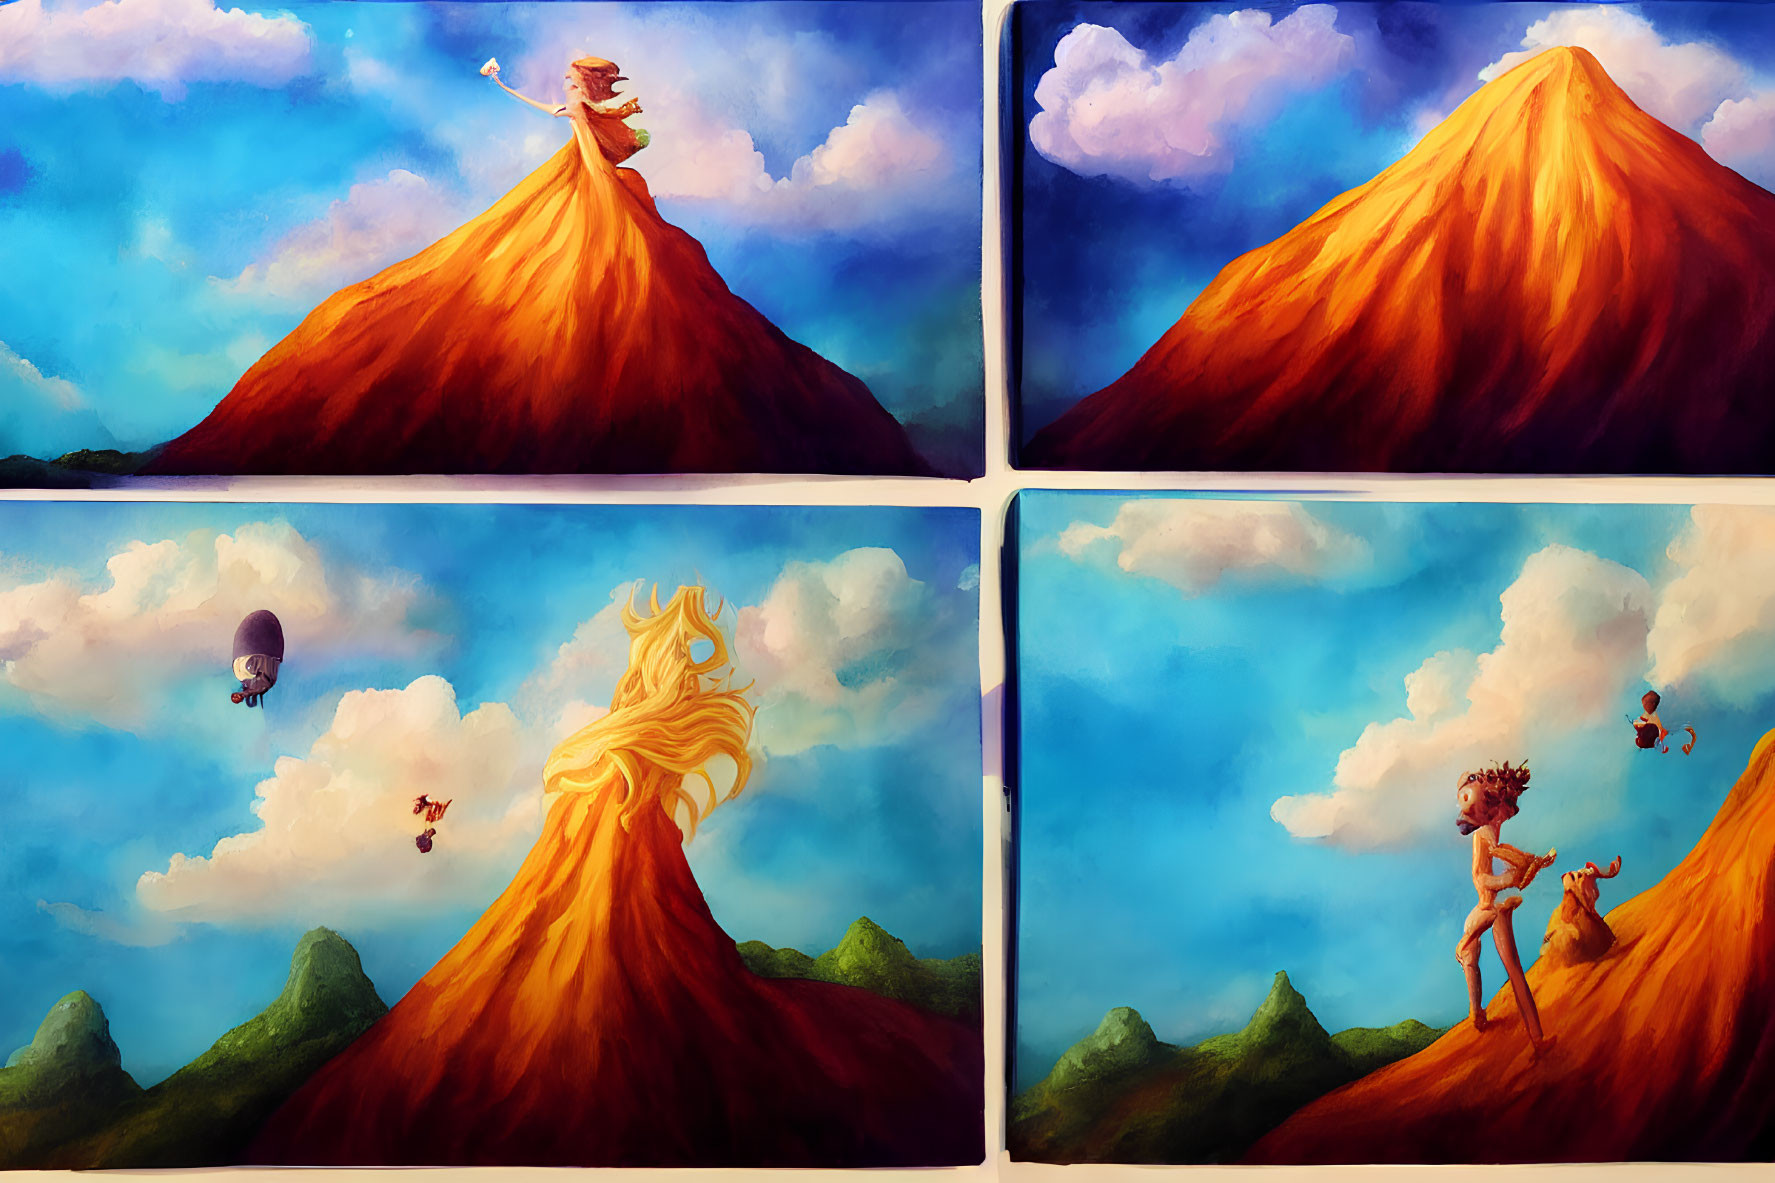 Four-panel artwork of animated volcano scenarios: woman at summit, fiery eruption, hot air balloon, person